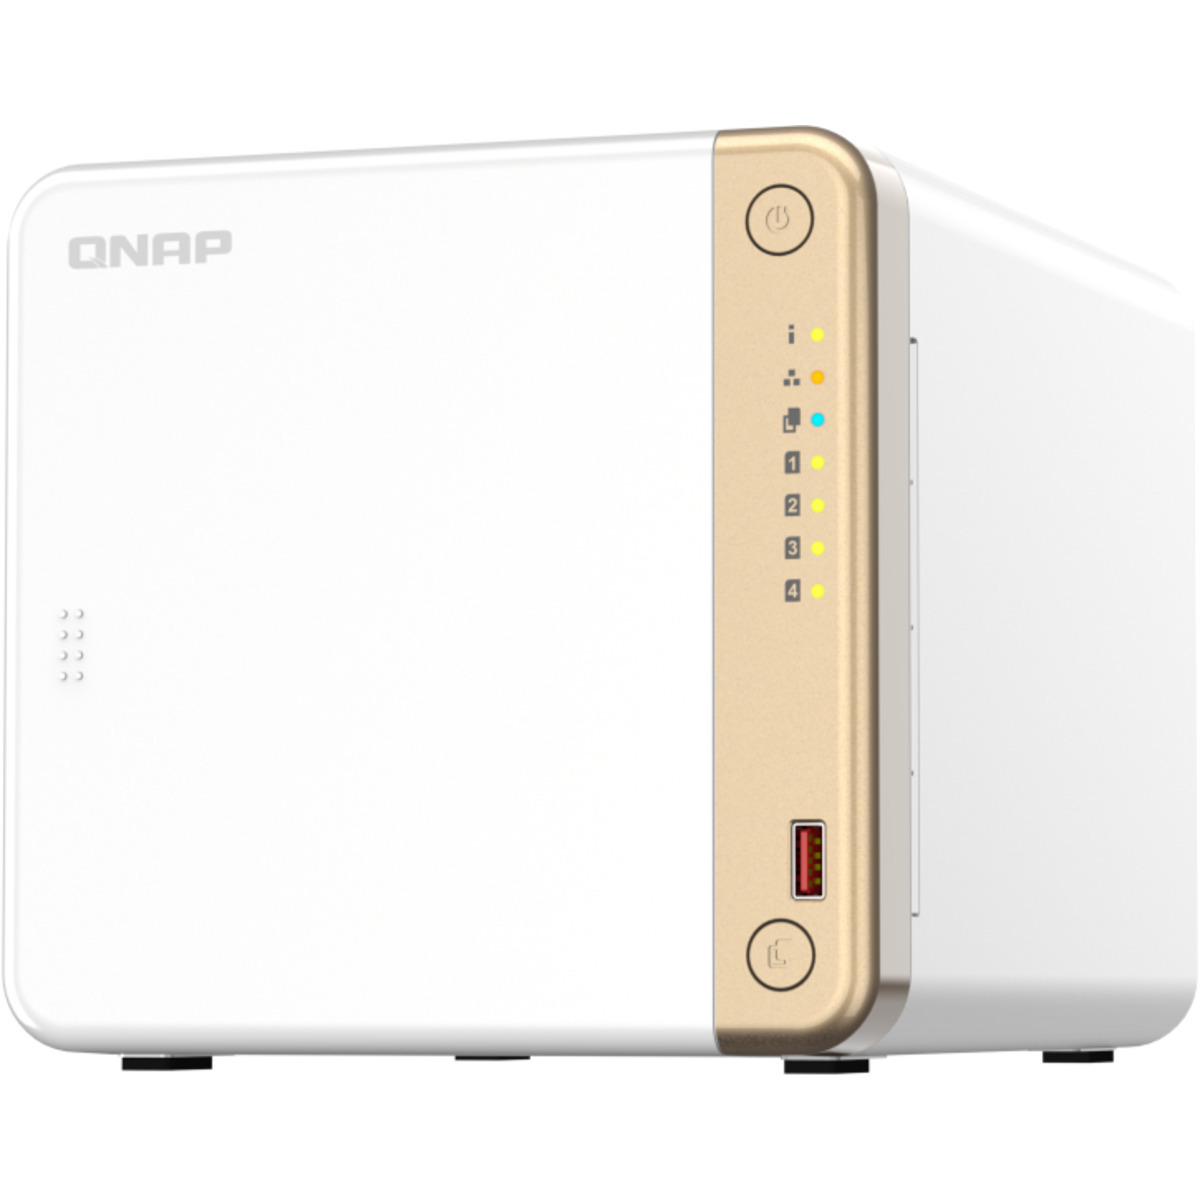 QNAP TS-462 40tb 4-Bay Desktop Multimedia / Power User / Business NAS - Network Attached Storage Device 4x10tb Western Digital Red Pro WD102KFBX 3.5 7200rpm SATA 6Gb/s HDD NAS Class Drives Installed - Burn-In Tested - ON SALE TS-462